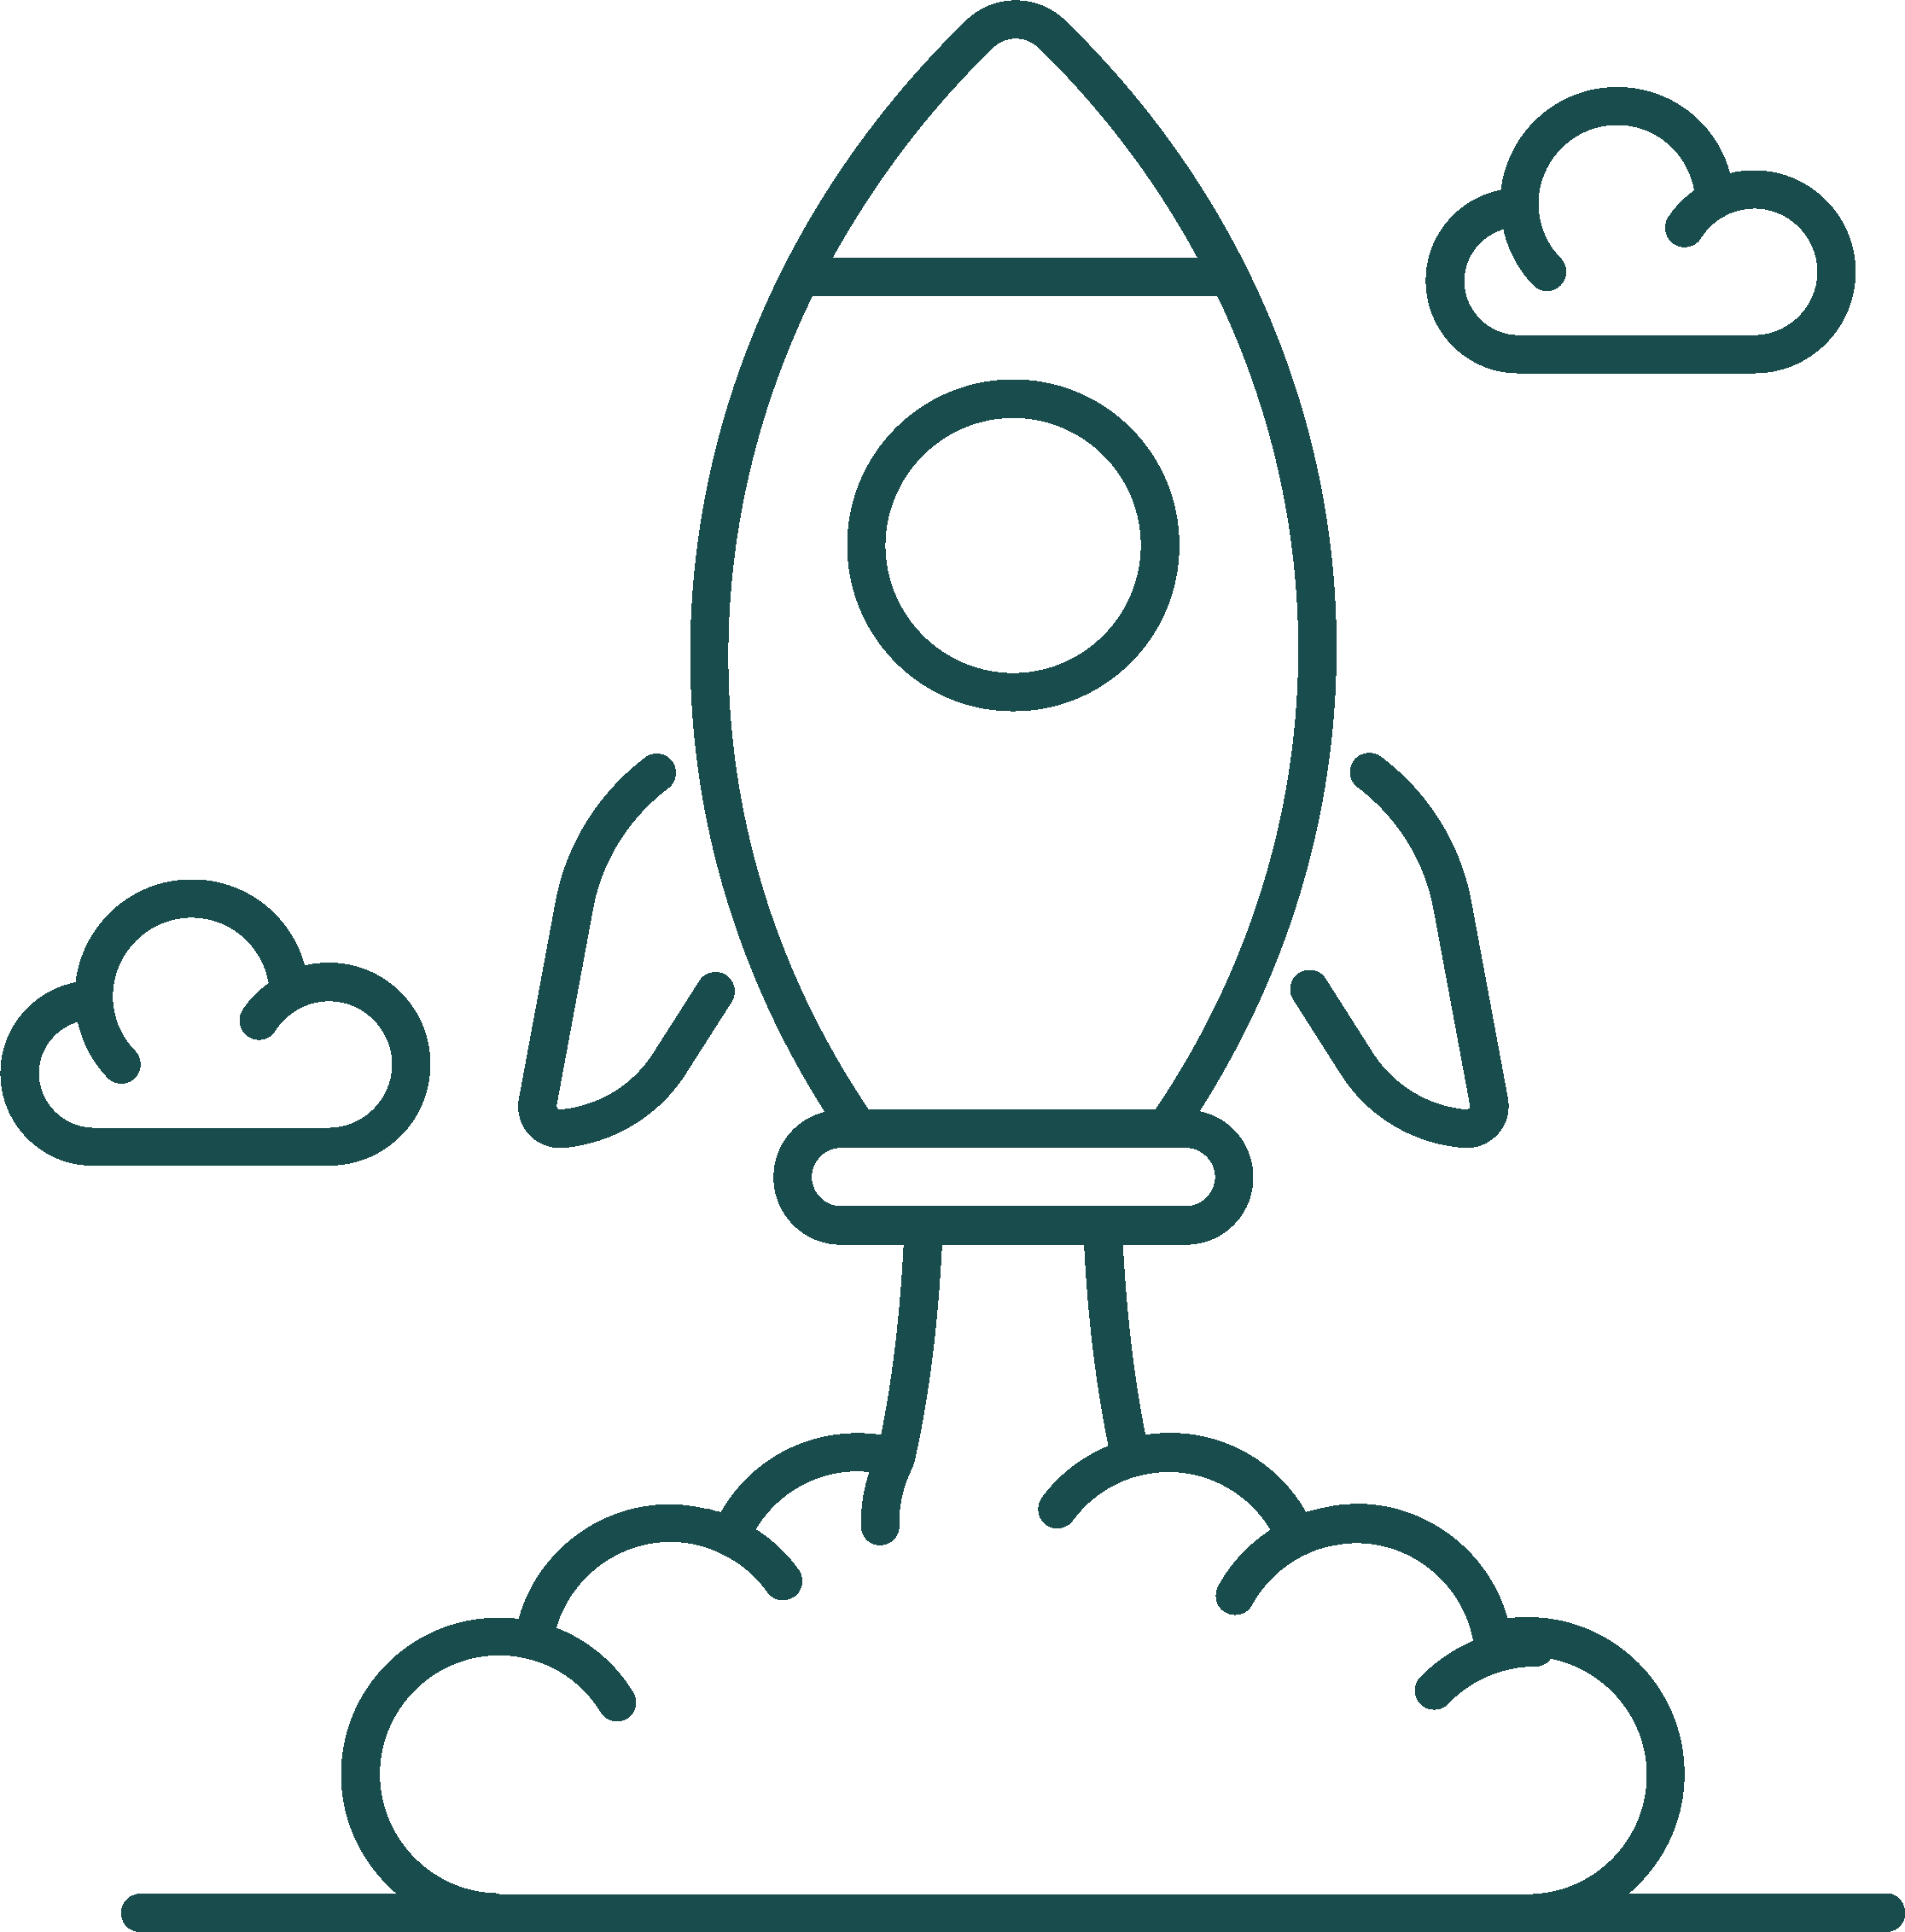 icon of a rocketship taking off promoting start-up creation within the masters in software management program